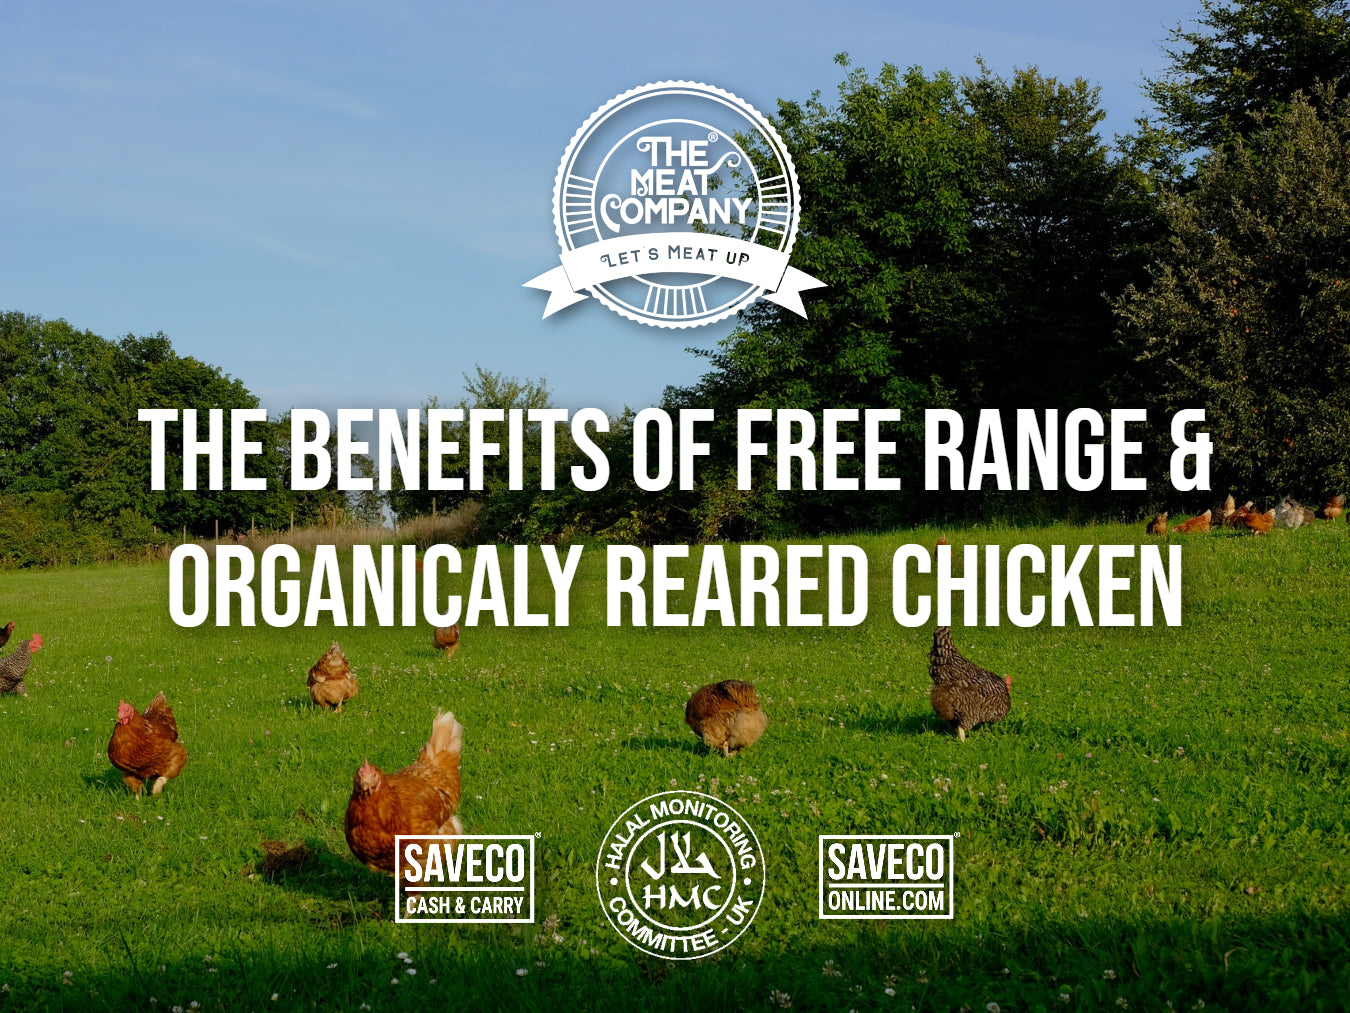 The Benefits Of Free Range & Organically Reared Chicken at The Meat Company Bradford